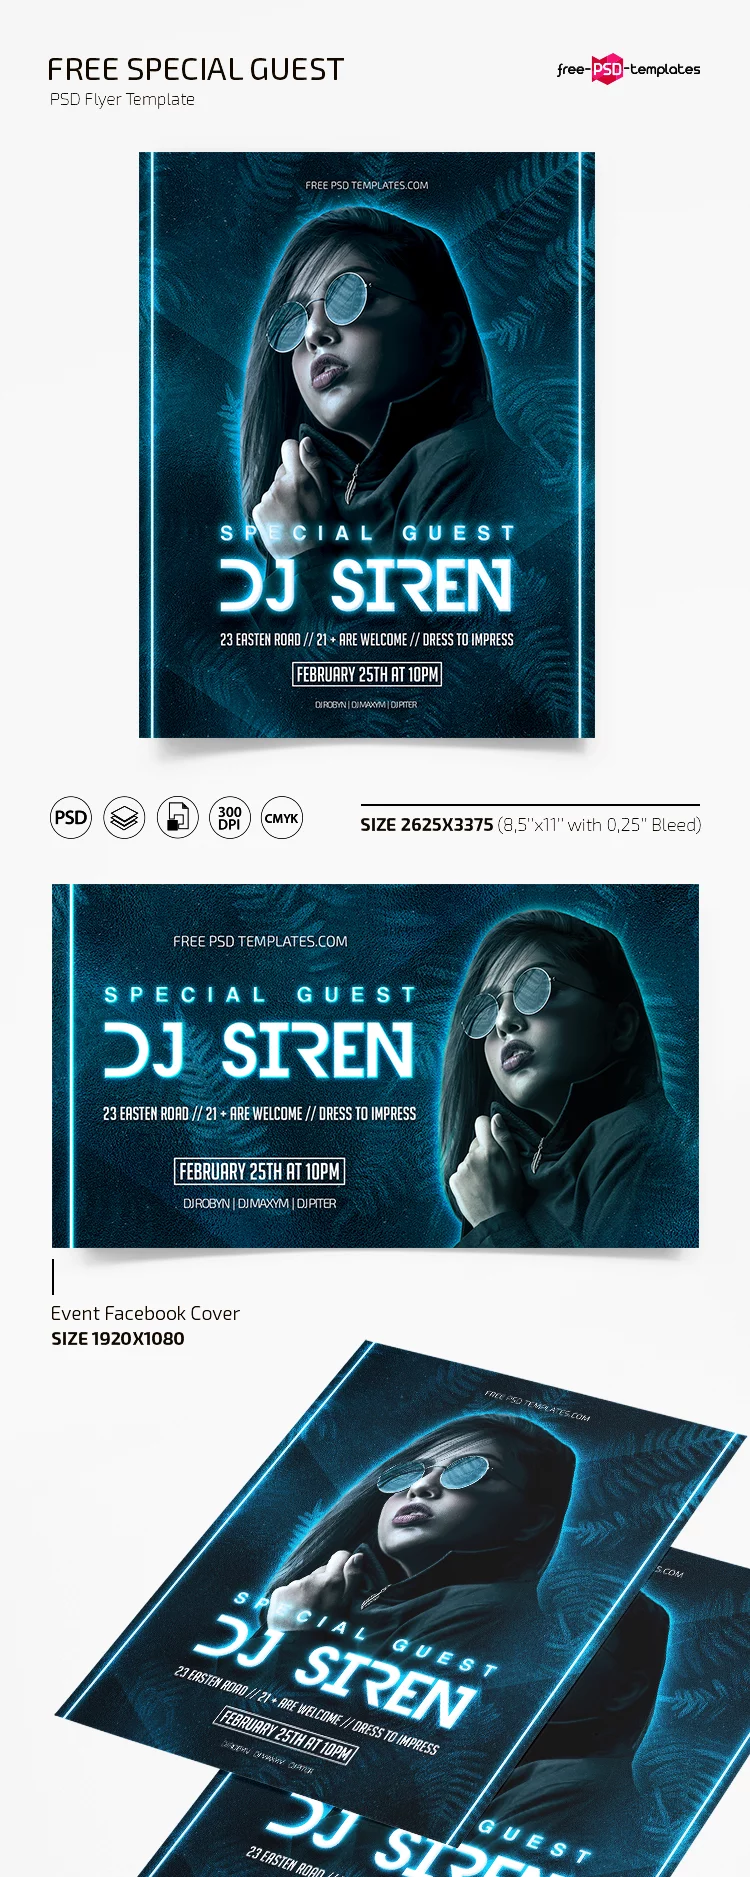 Free Special Guest Flyer Template in PSD